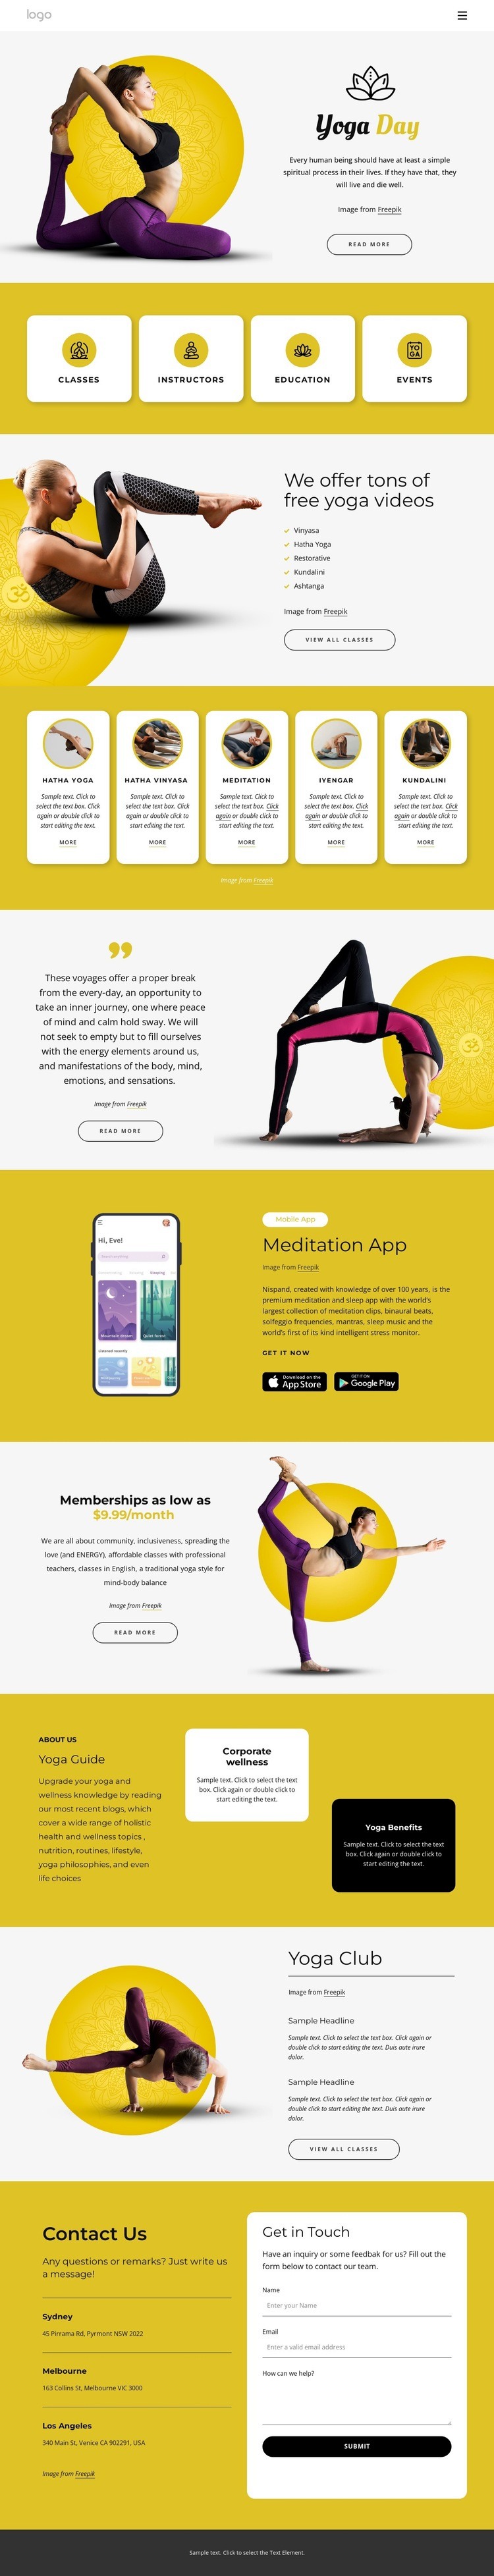 Yoga events and classes Elementor Template Alternative